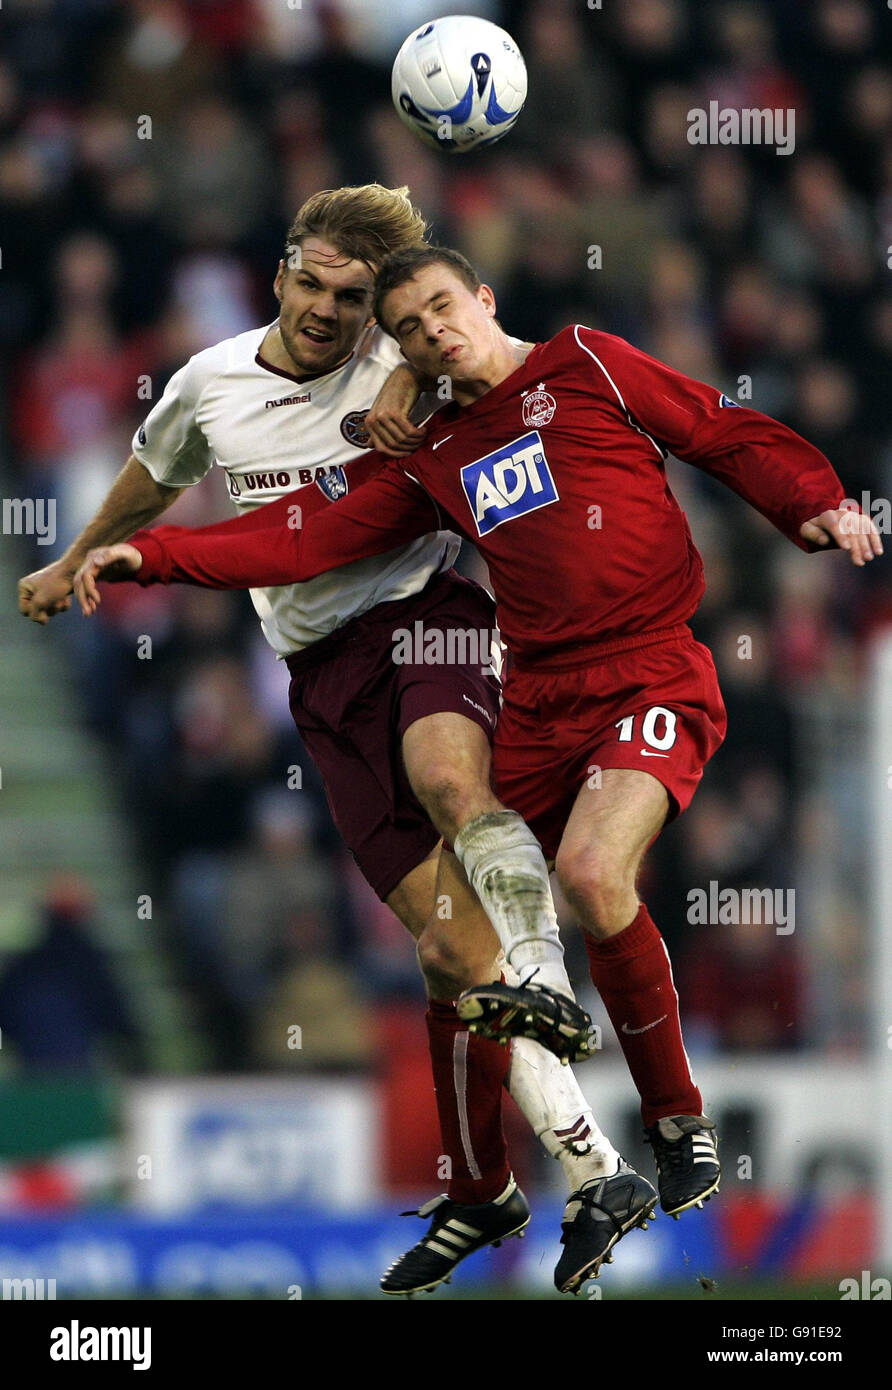 Hearts' Robbie Neilson (L) challenges Aberdeen's Darren Mackie for the ball during the Bank of Scotland Premier League match at Pittodrie Stadium, Aberdeen, Sunday November 20, 2005. PRESS ASSOCIATION Photo. Photo credit should read: Andrew Milligan/PA. Stock Photo